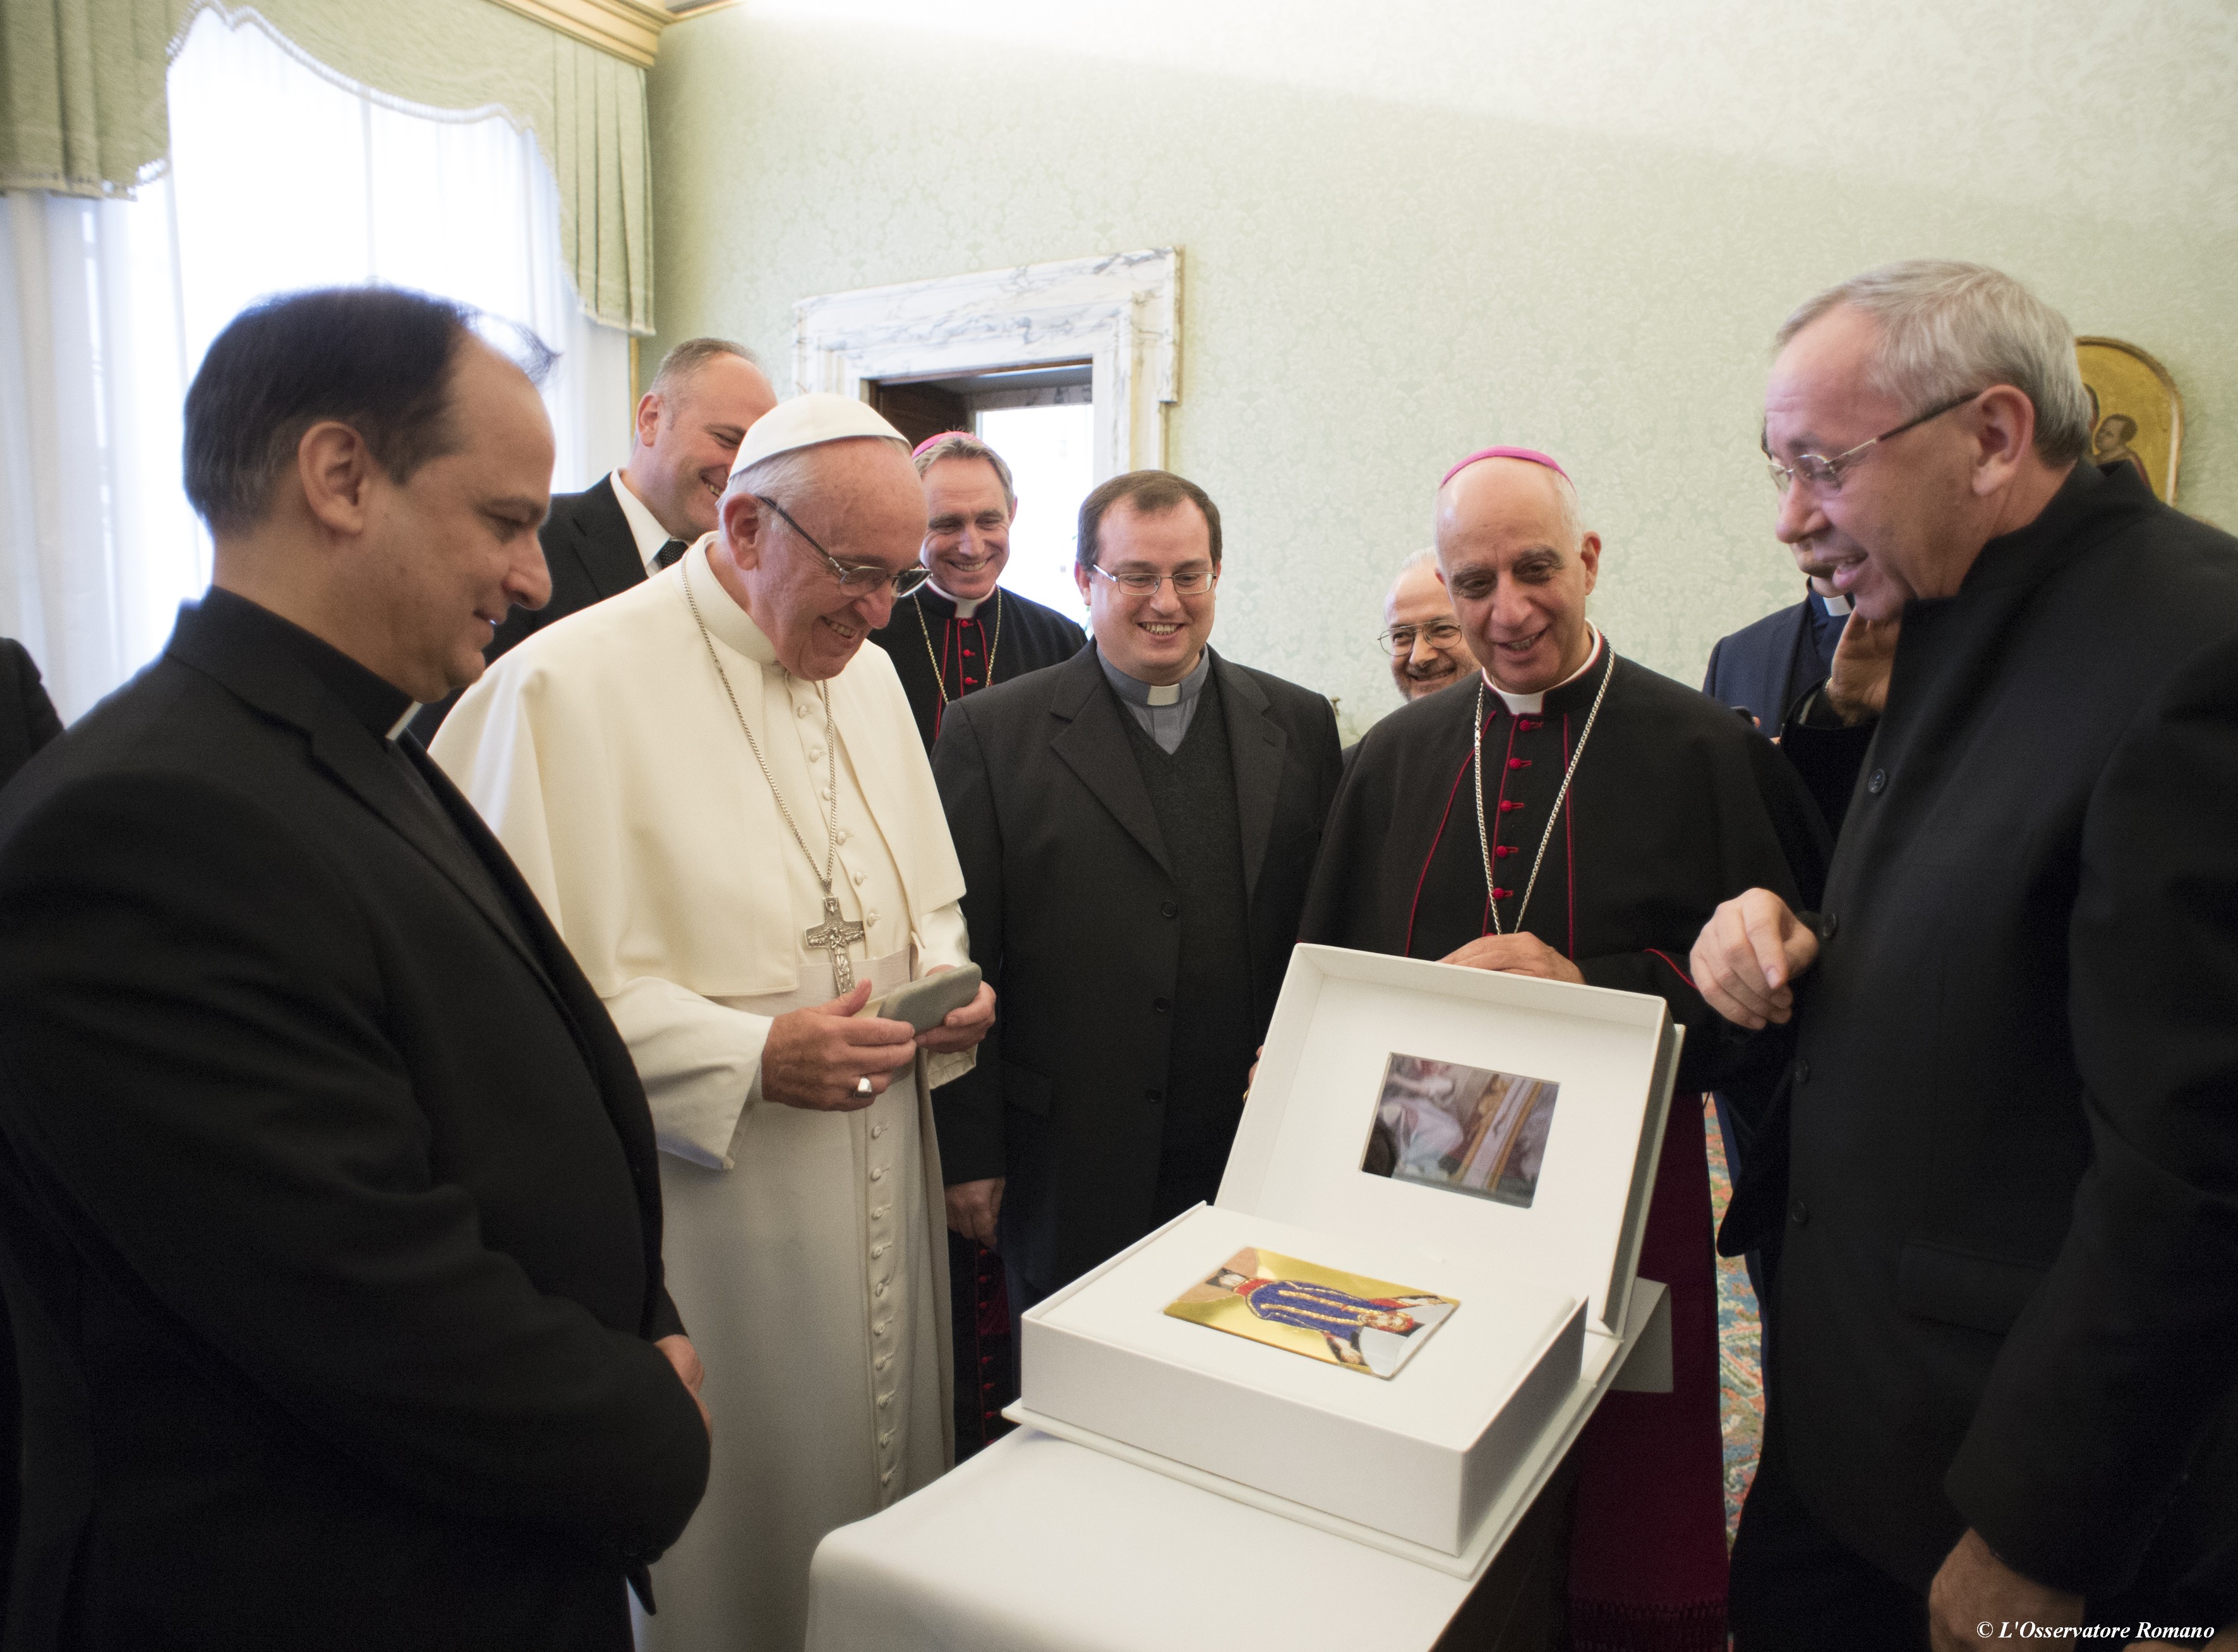 The Gospel book of Mercy is presentated to Pope Francis